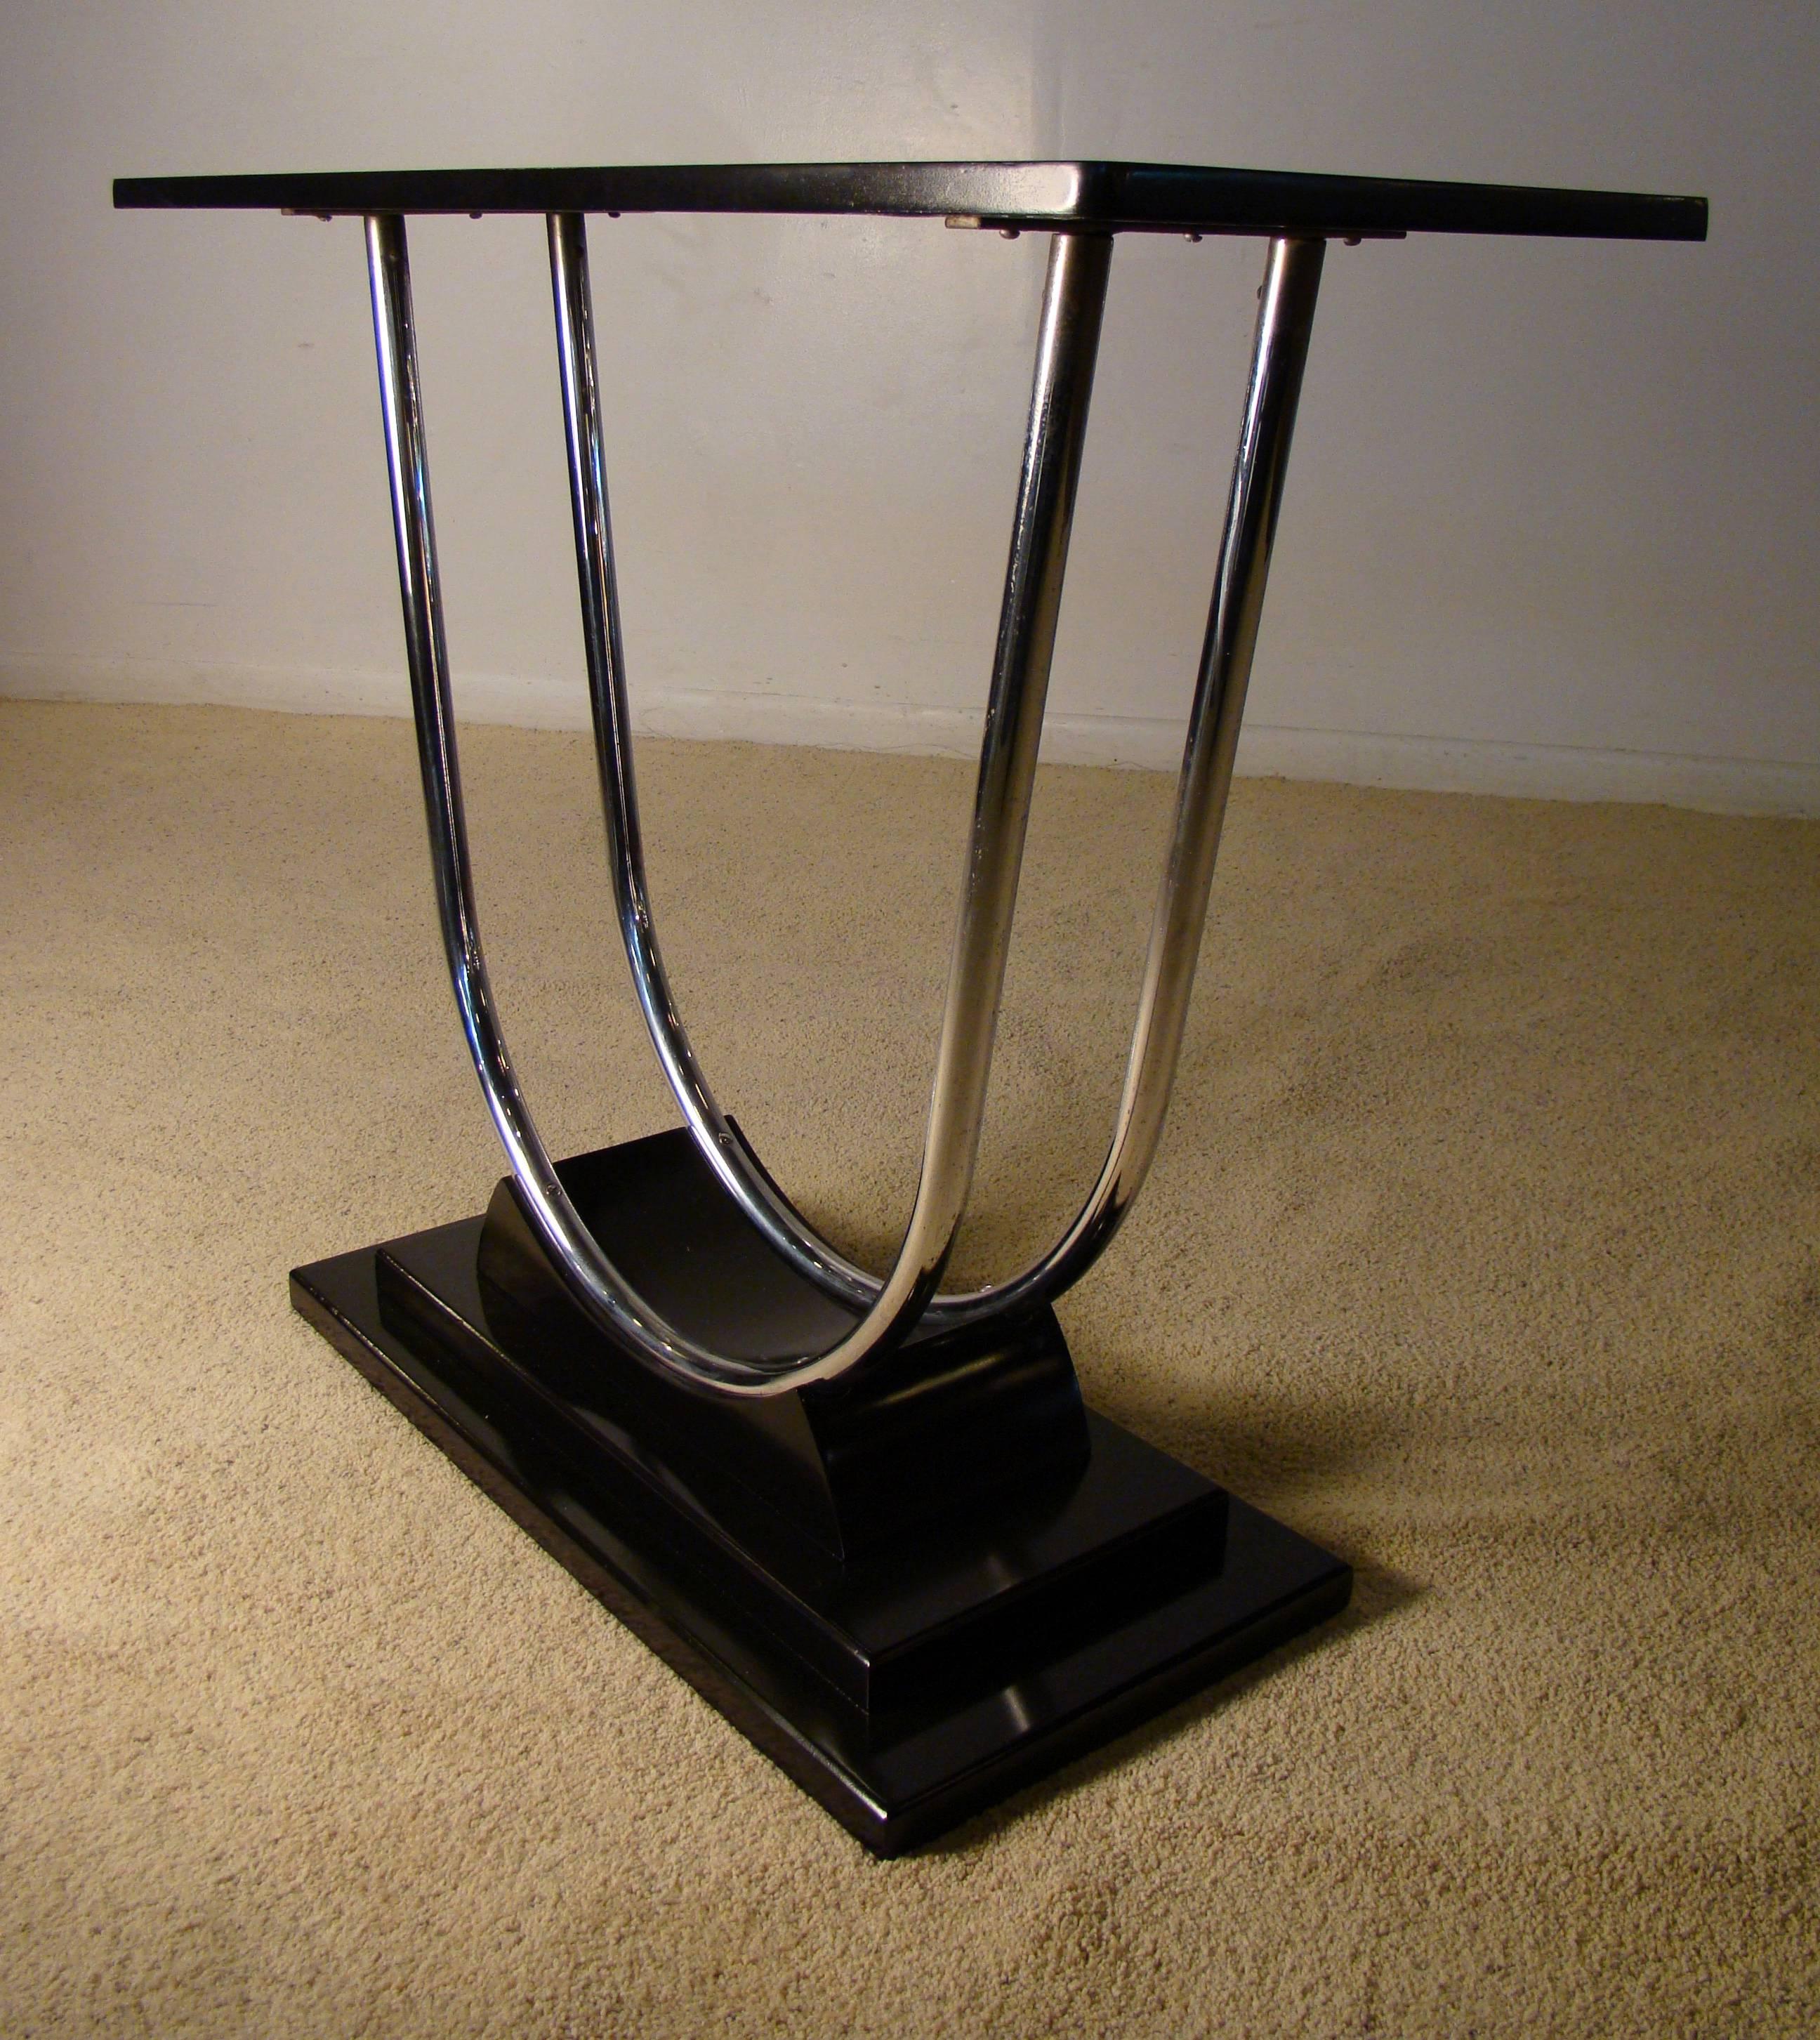 Stunning Art Deco Machine Age Streamline Chrome Console Table, circa 1930s In Good Condition For Sale In Denver, CO